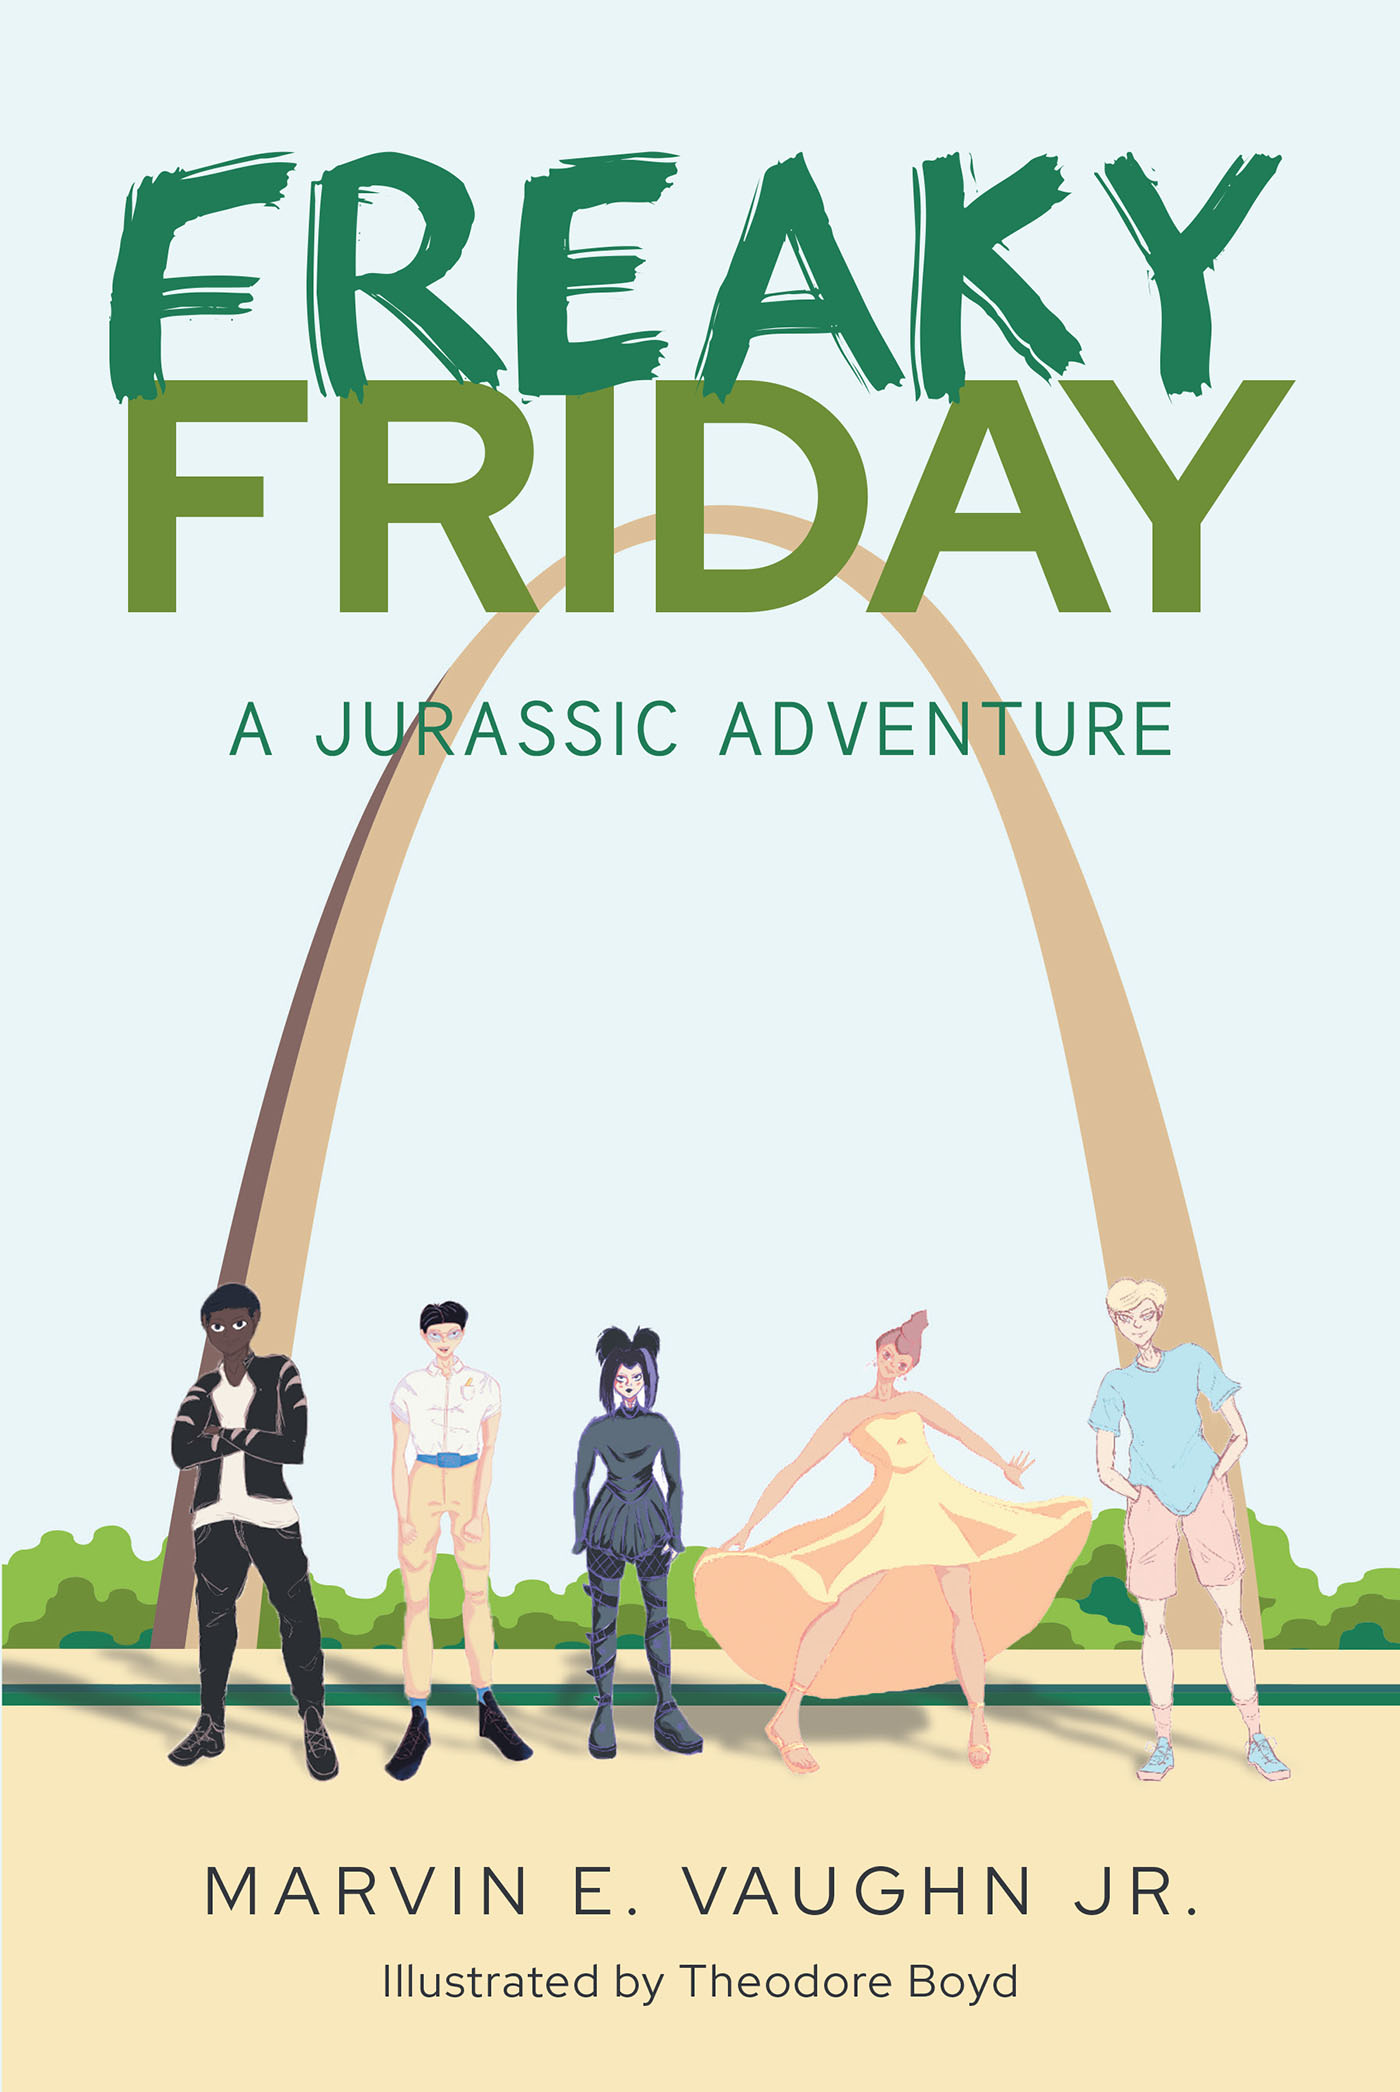 Author Marvin E. Vaughn Jr.’s New Book, "Freaky Friday A Jurassic Adventure," is About Five Teenagers Being Sent Back Through Time to the Jurassic Period